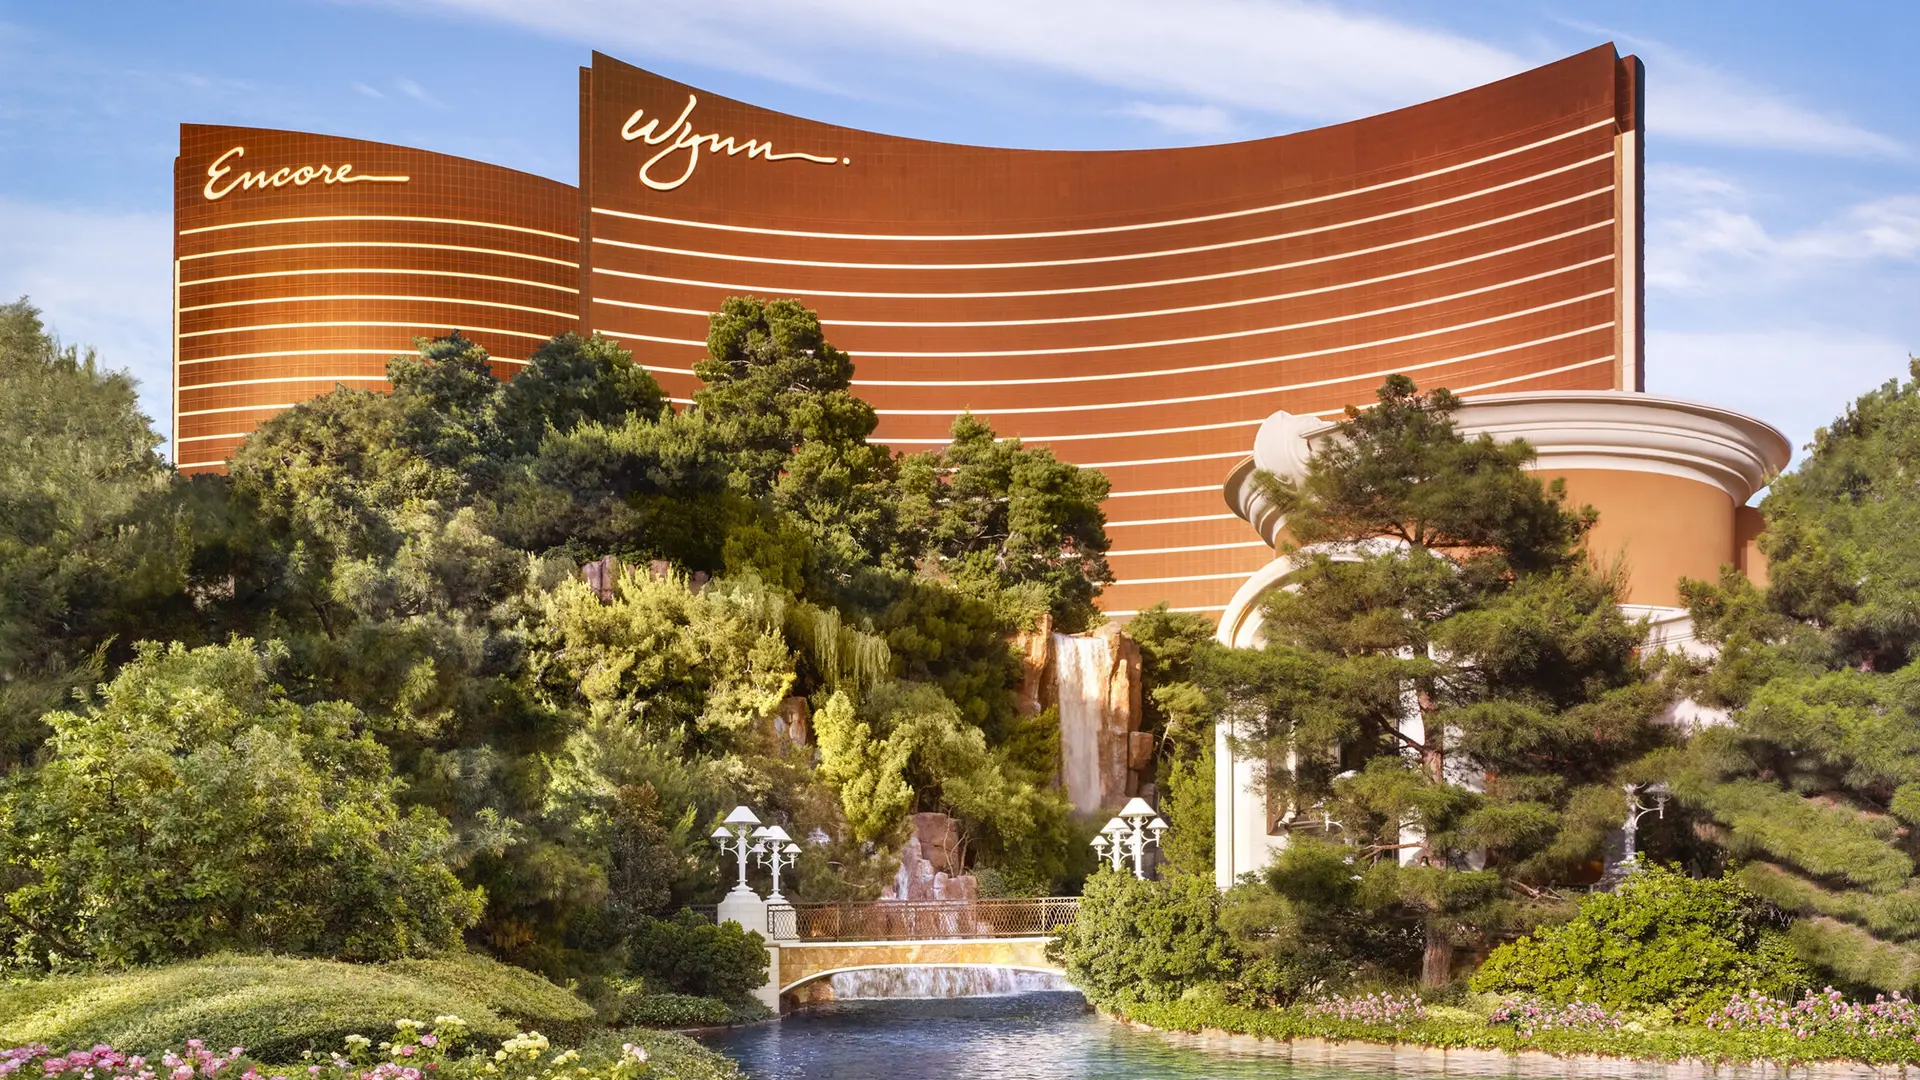 View of nature, gold and white bridge and the massive brown/bronze coloured building with white stripes saying: Encore and Wynn.